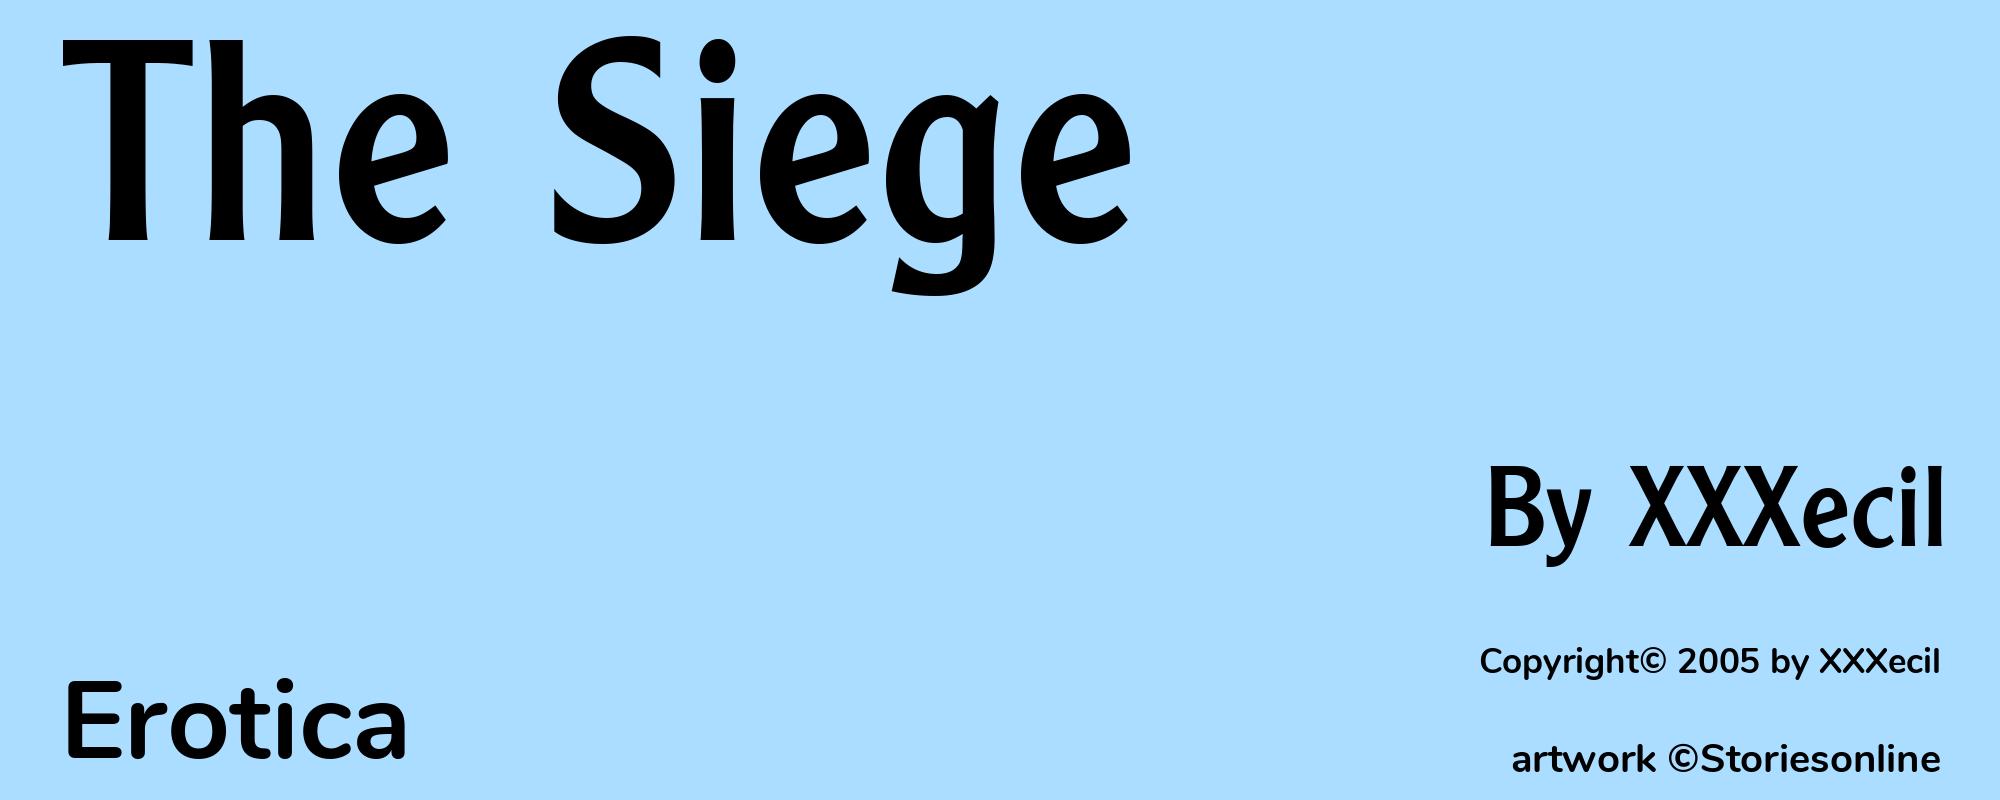 The Siege - Cover